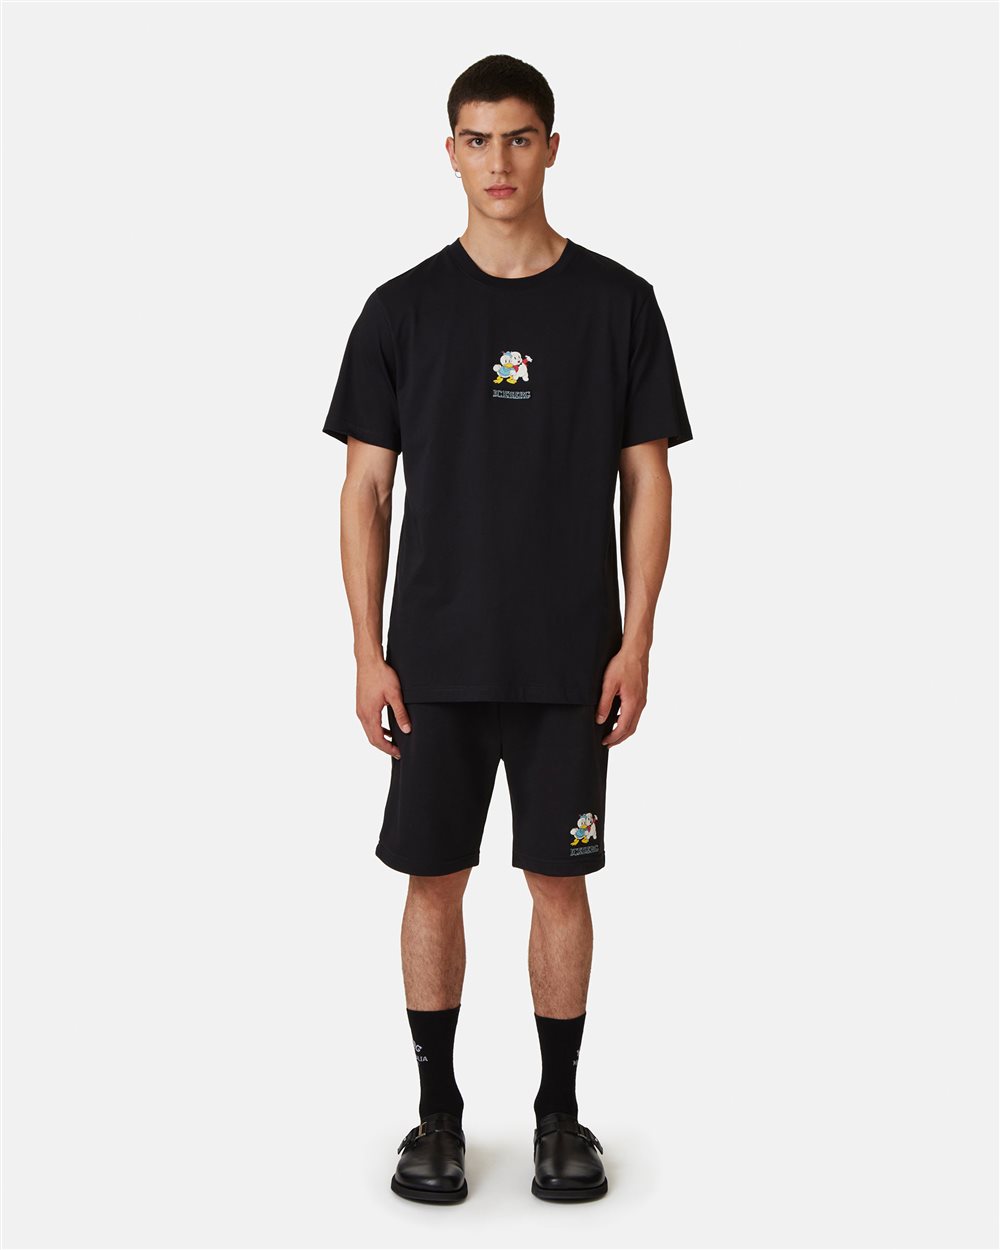 Bermuda shorts with cartoon logo and graphics - Iceberg - Official Website